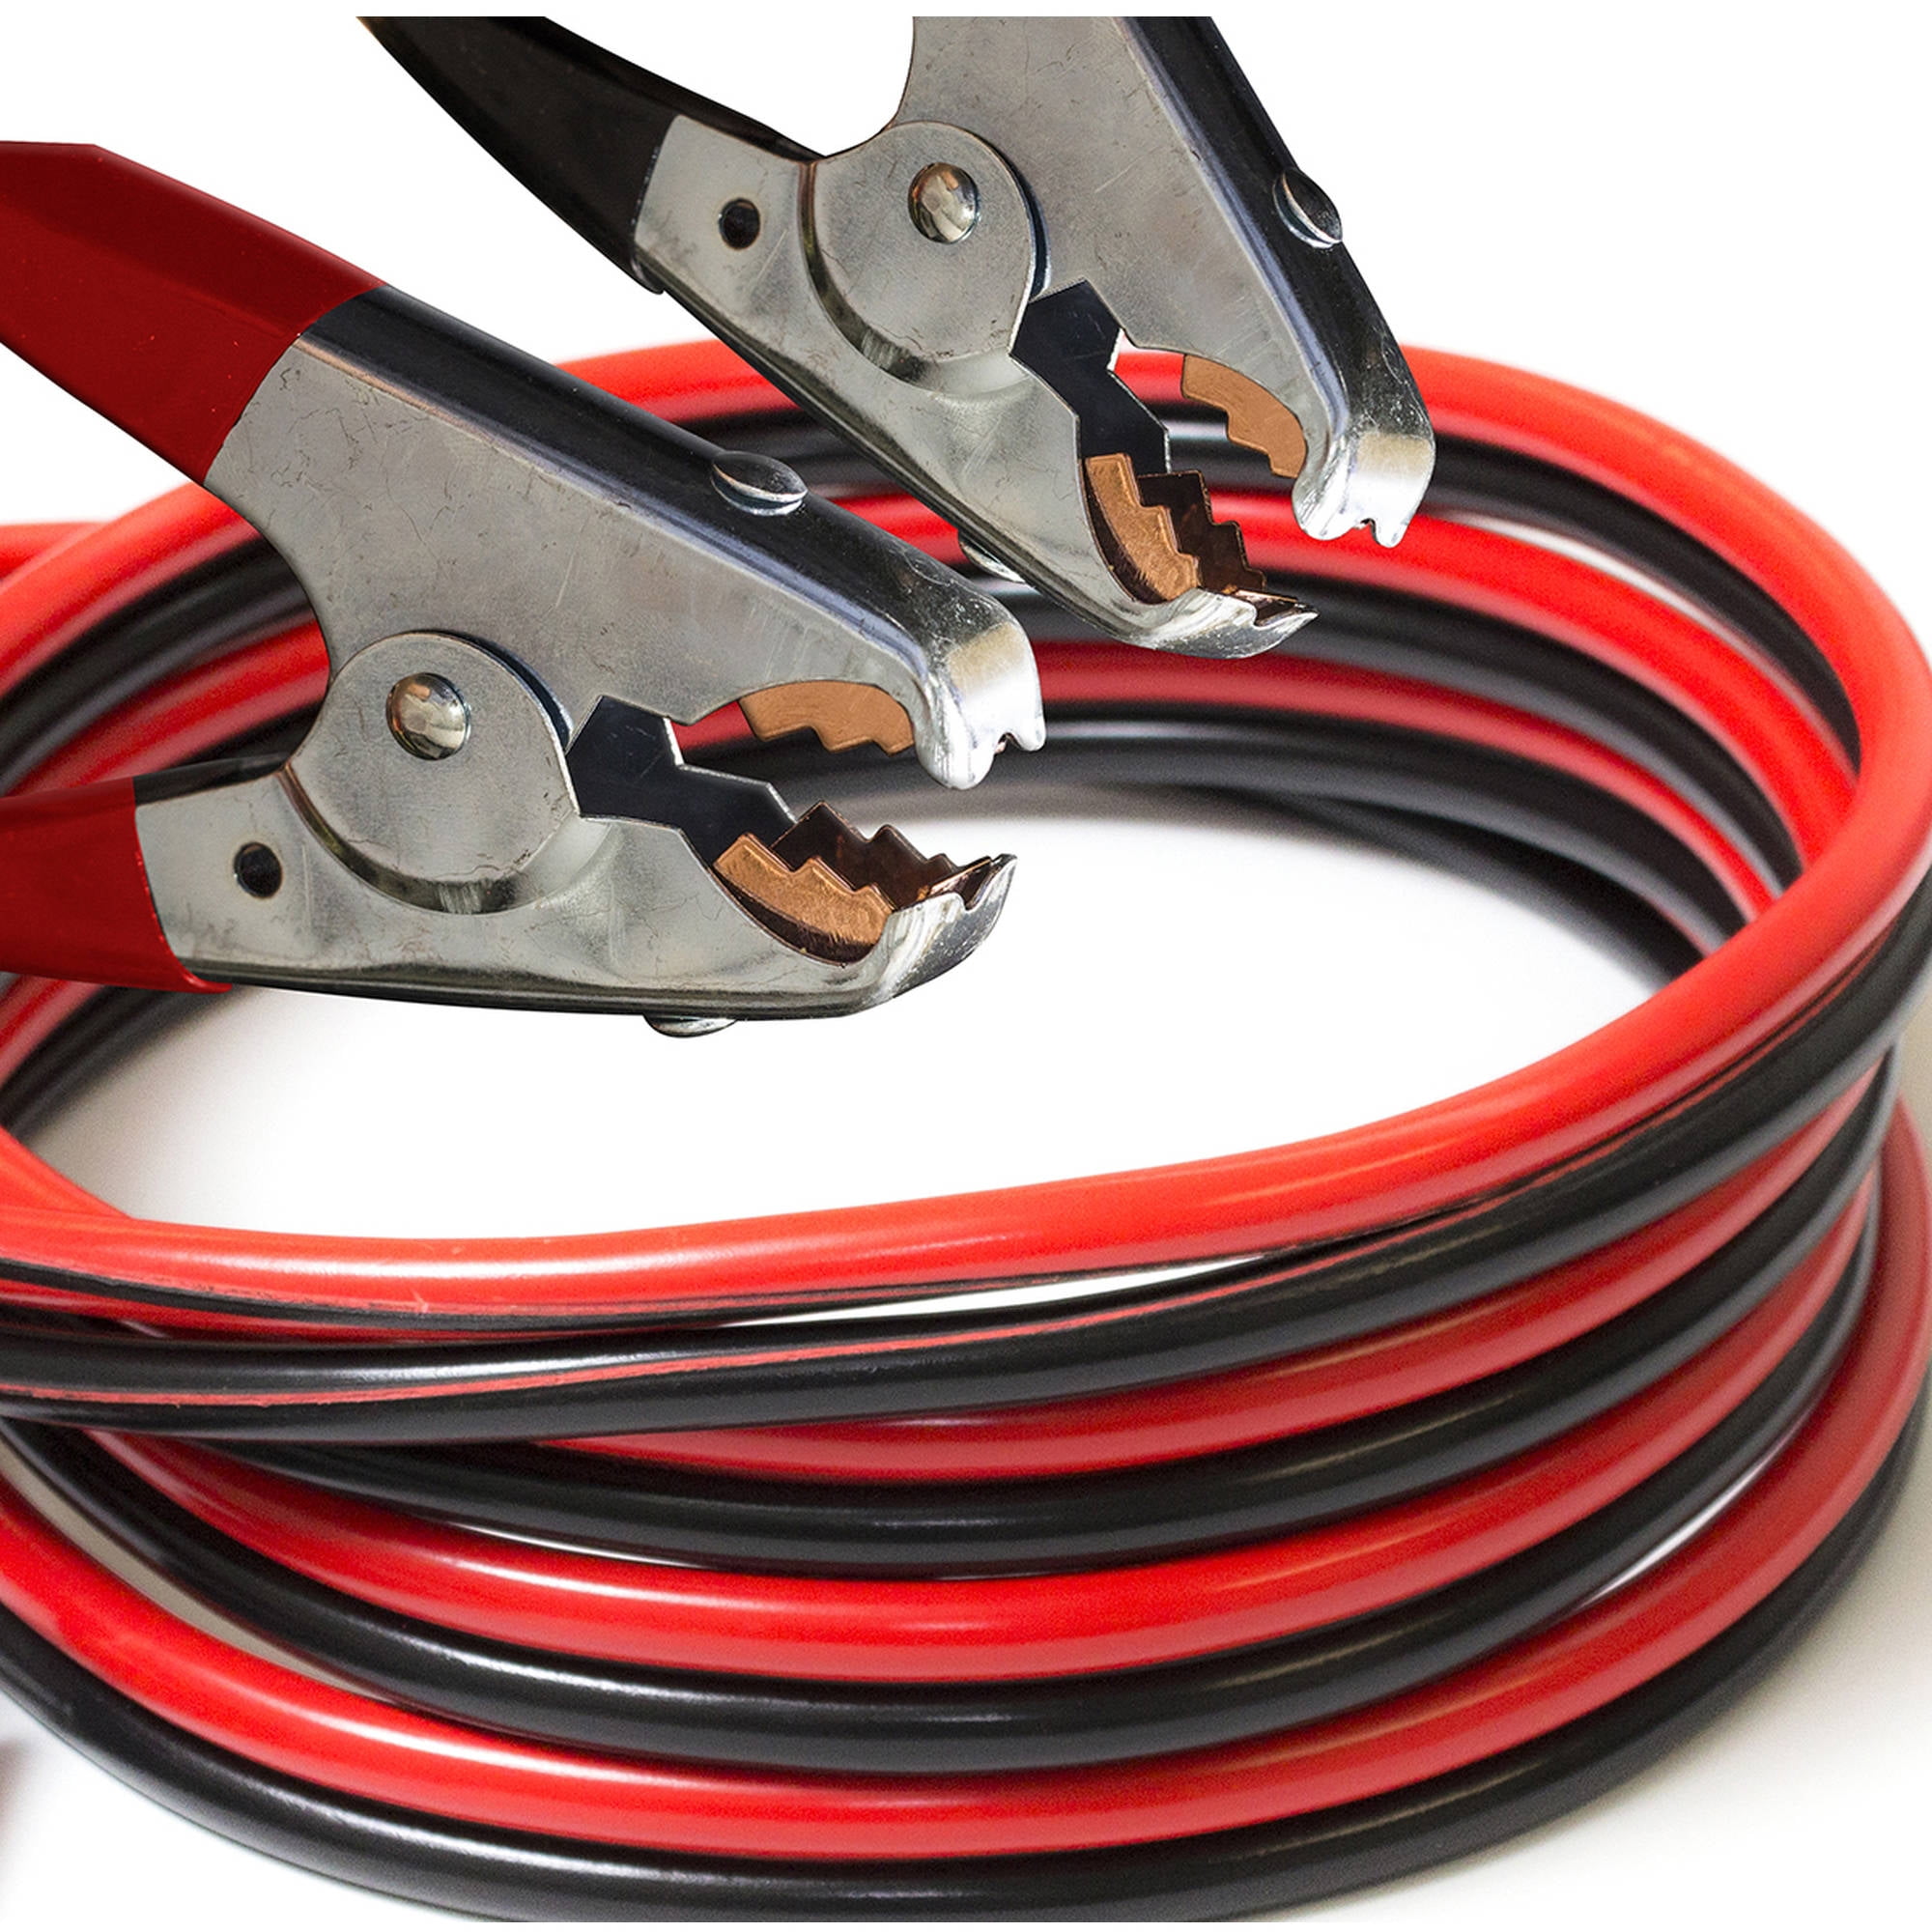 500-AMP Heavy Duty Battery Booster w/Carry Bag OxGord Pennzoil Jumper Cable 8-Gauge x 12-Foot 